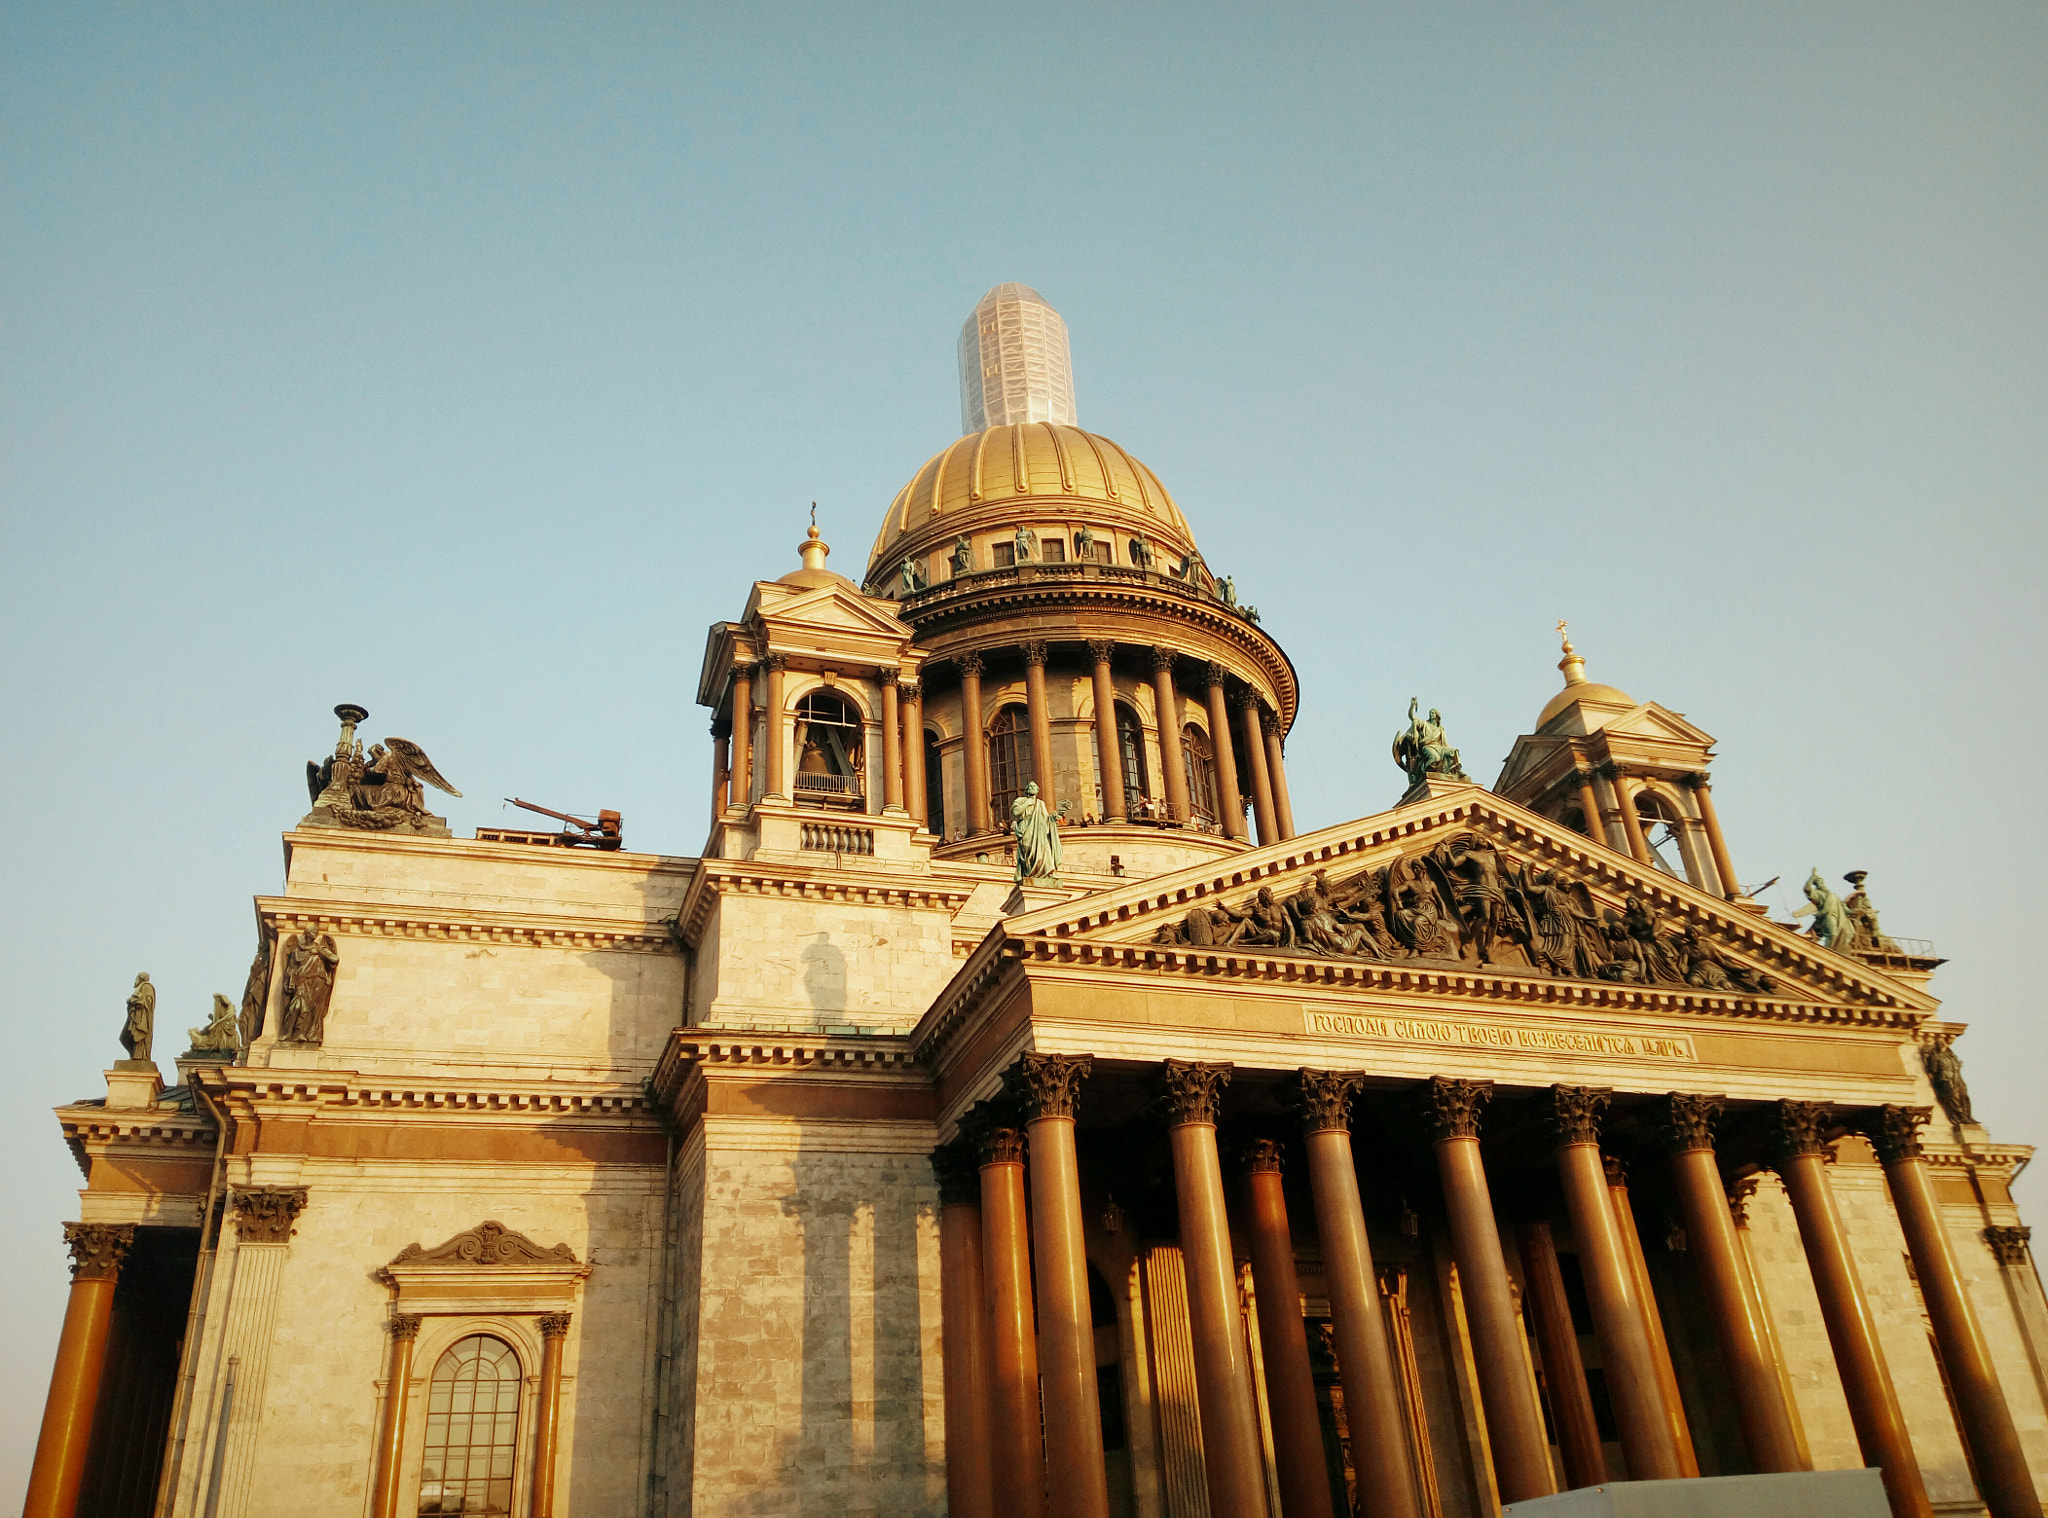 Meizu m1 metal sample photo. Saint isaac's cathedral photography